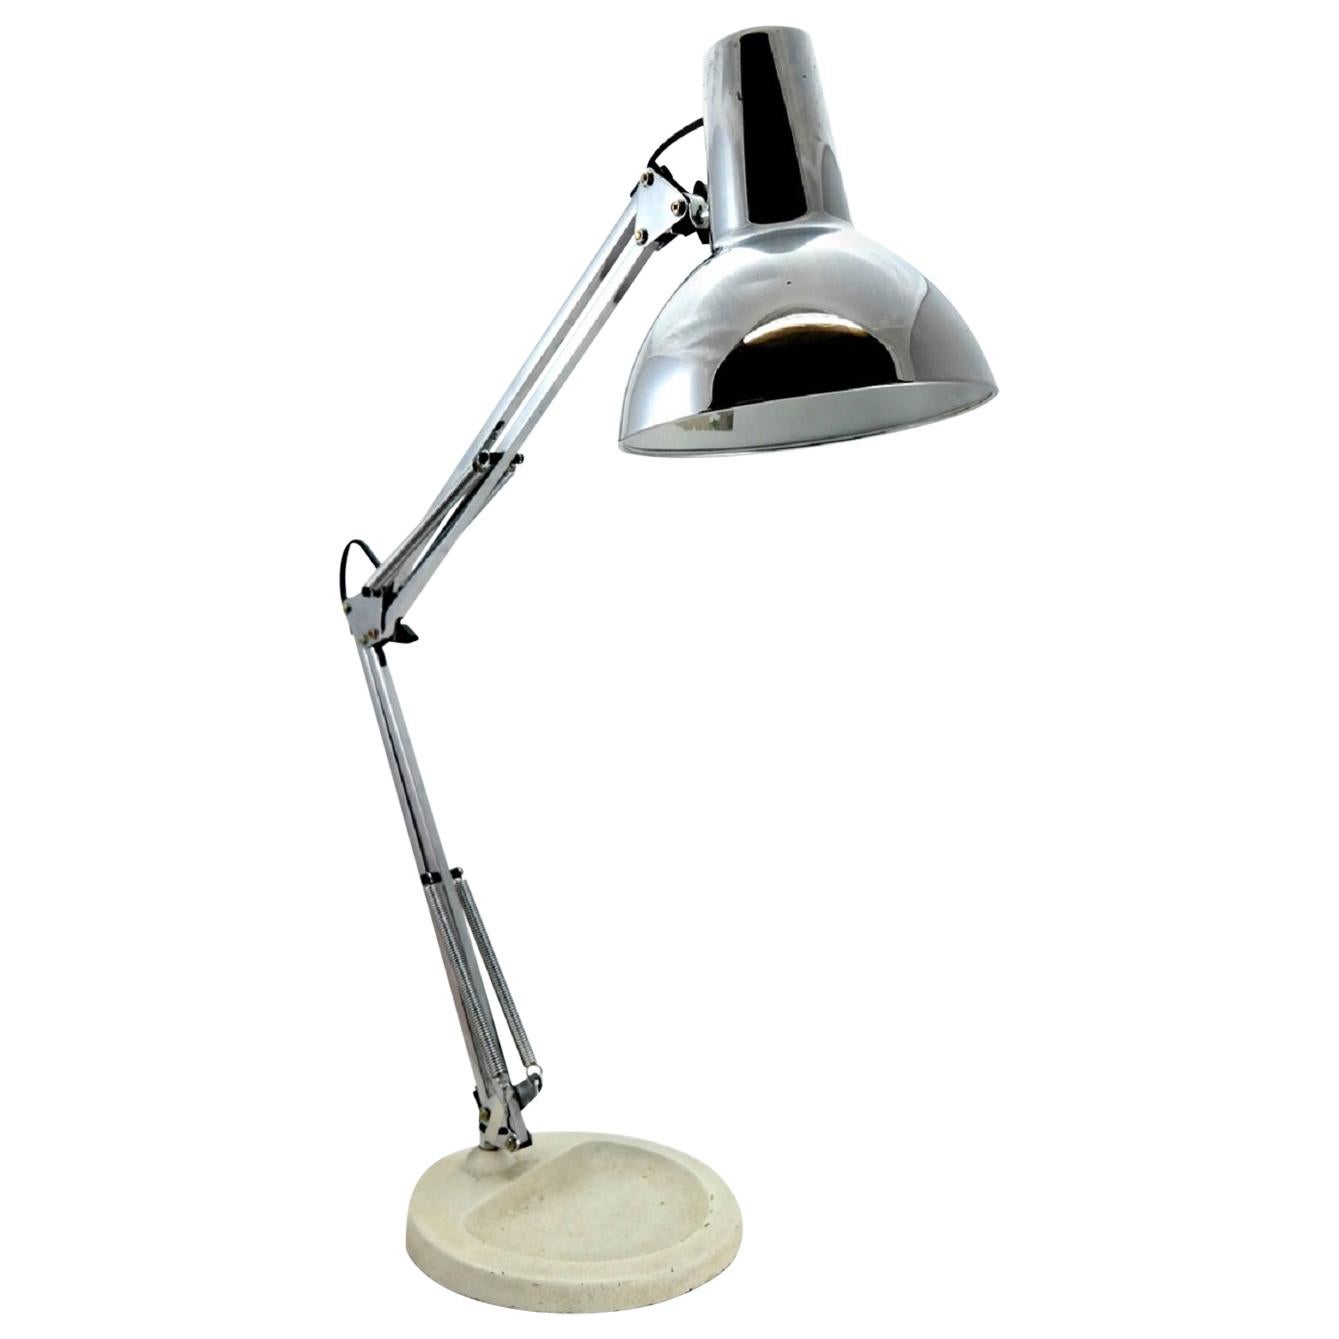 Adjustable Chrome Table Lamp with Cast Iron Base